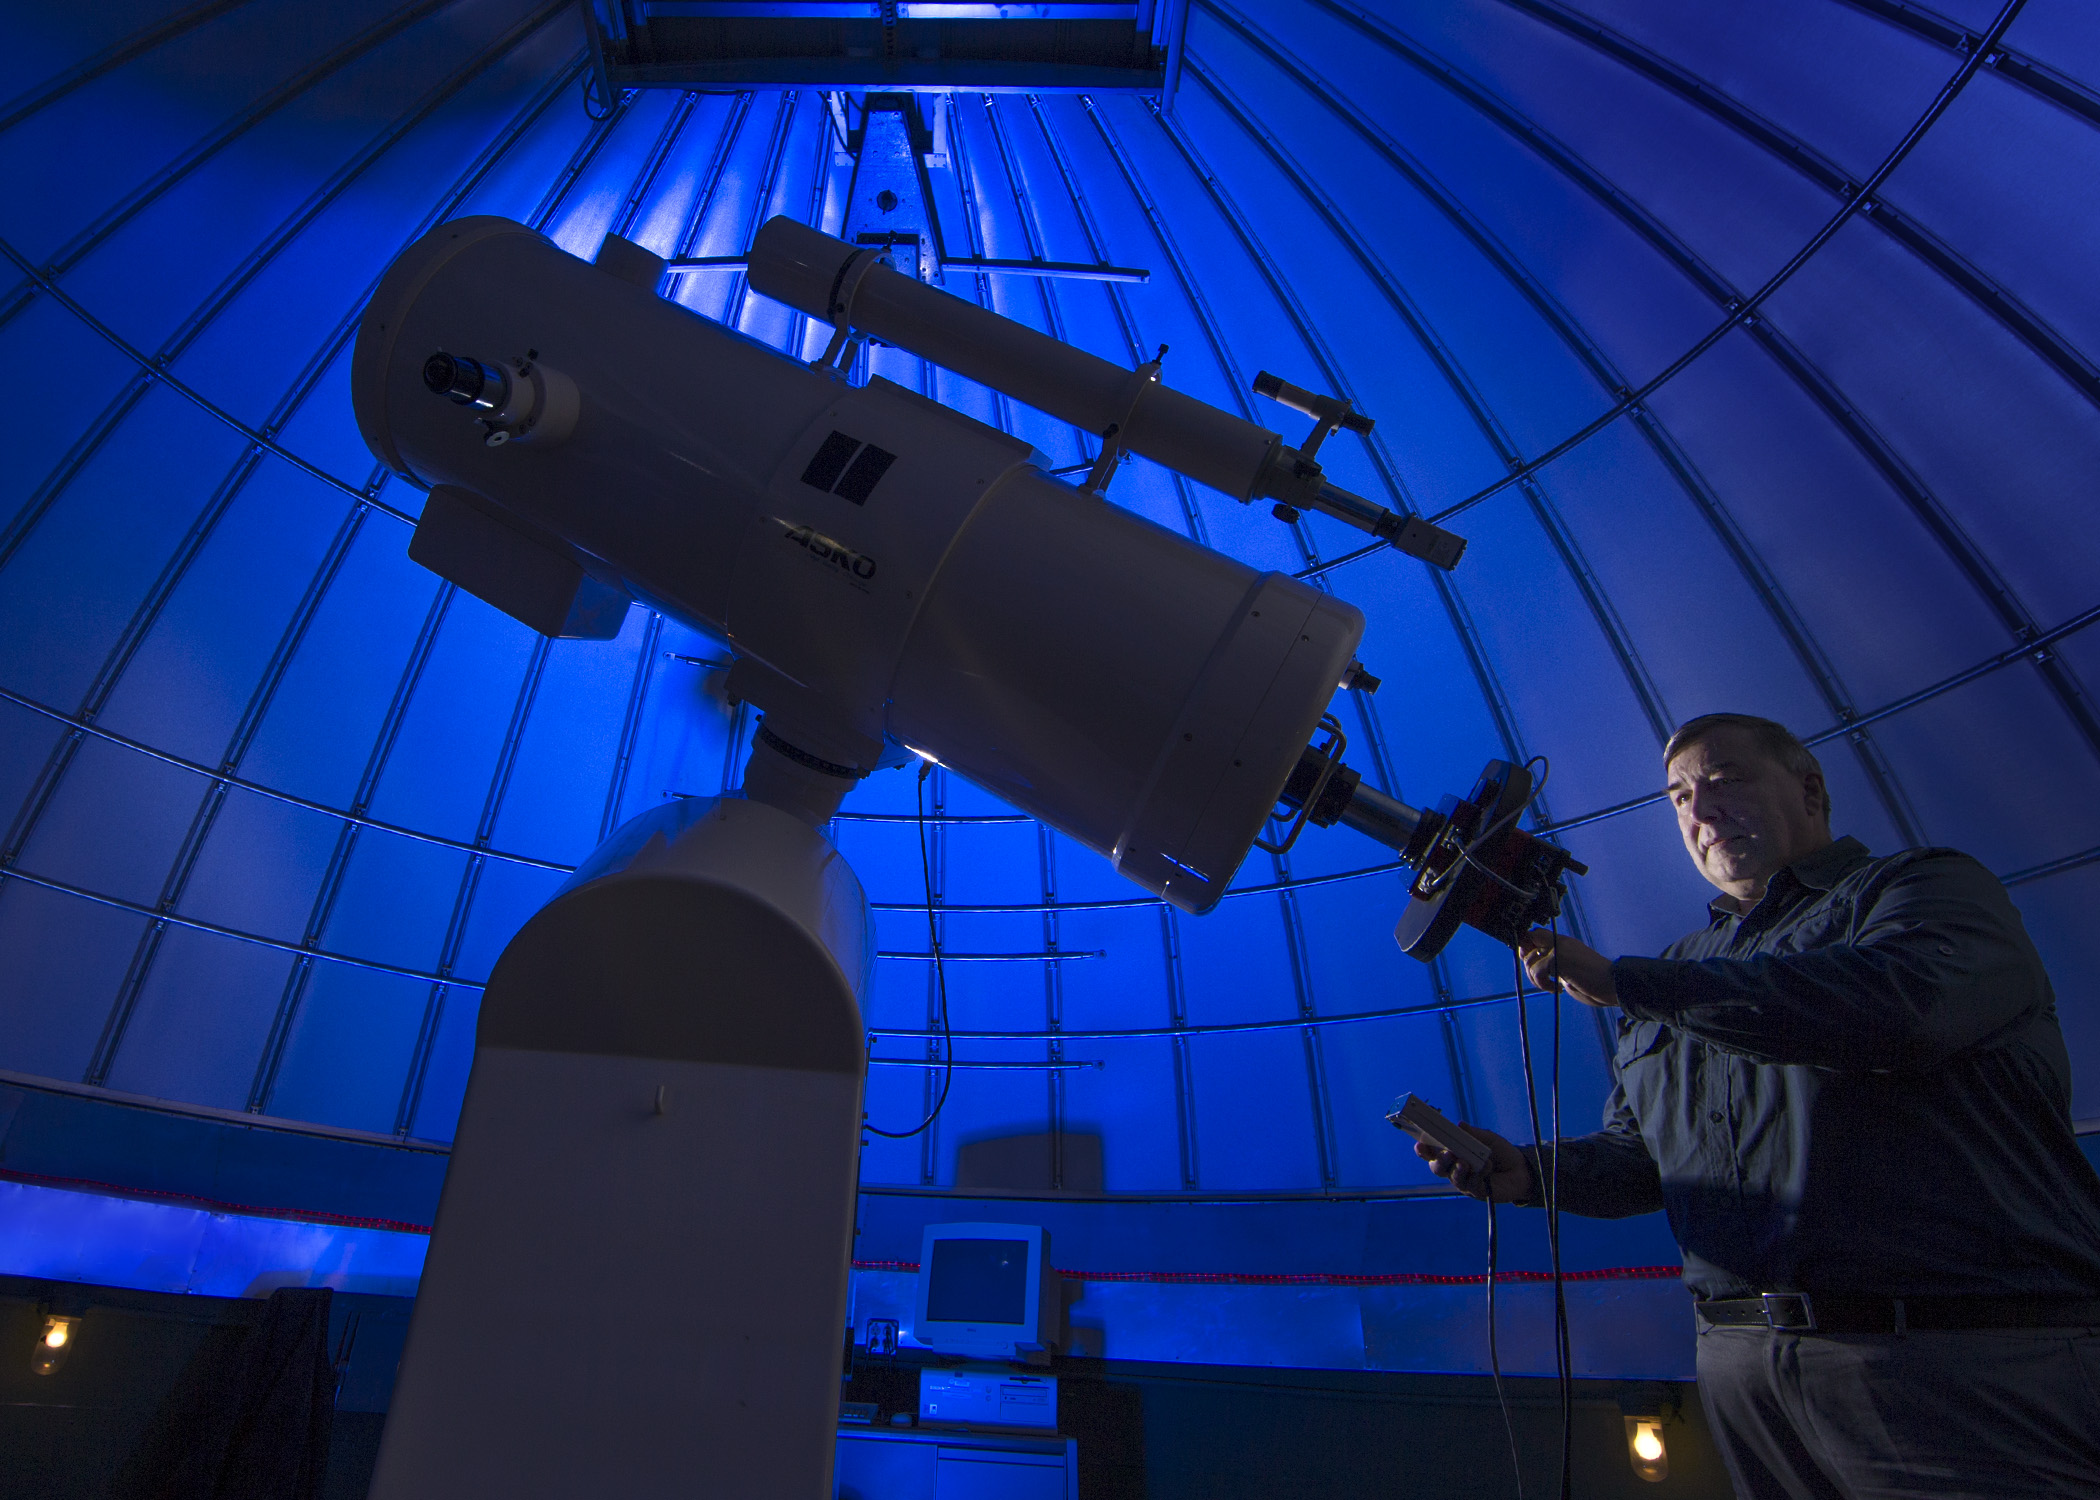 Mike Joner in the observatory at BYU's Eyring Science Center. Photo by Mark A. Philbrick